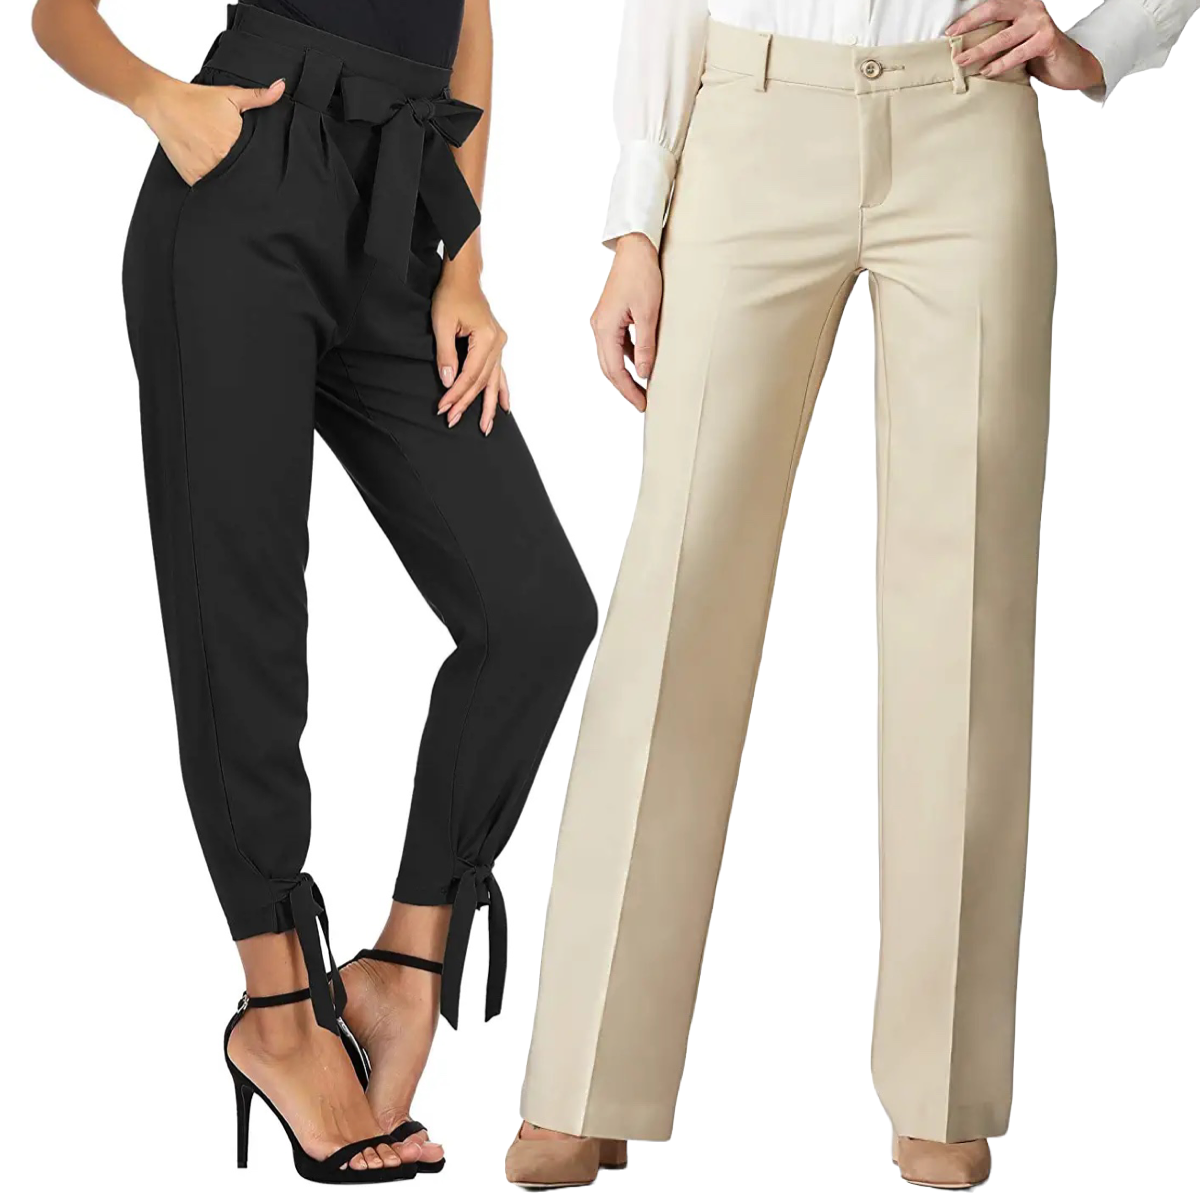 How to choose the best office trousers?